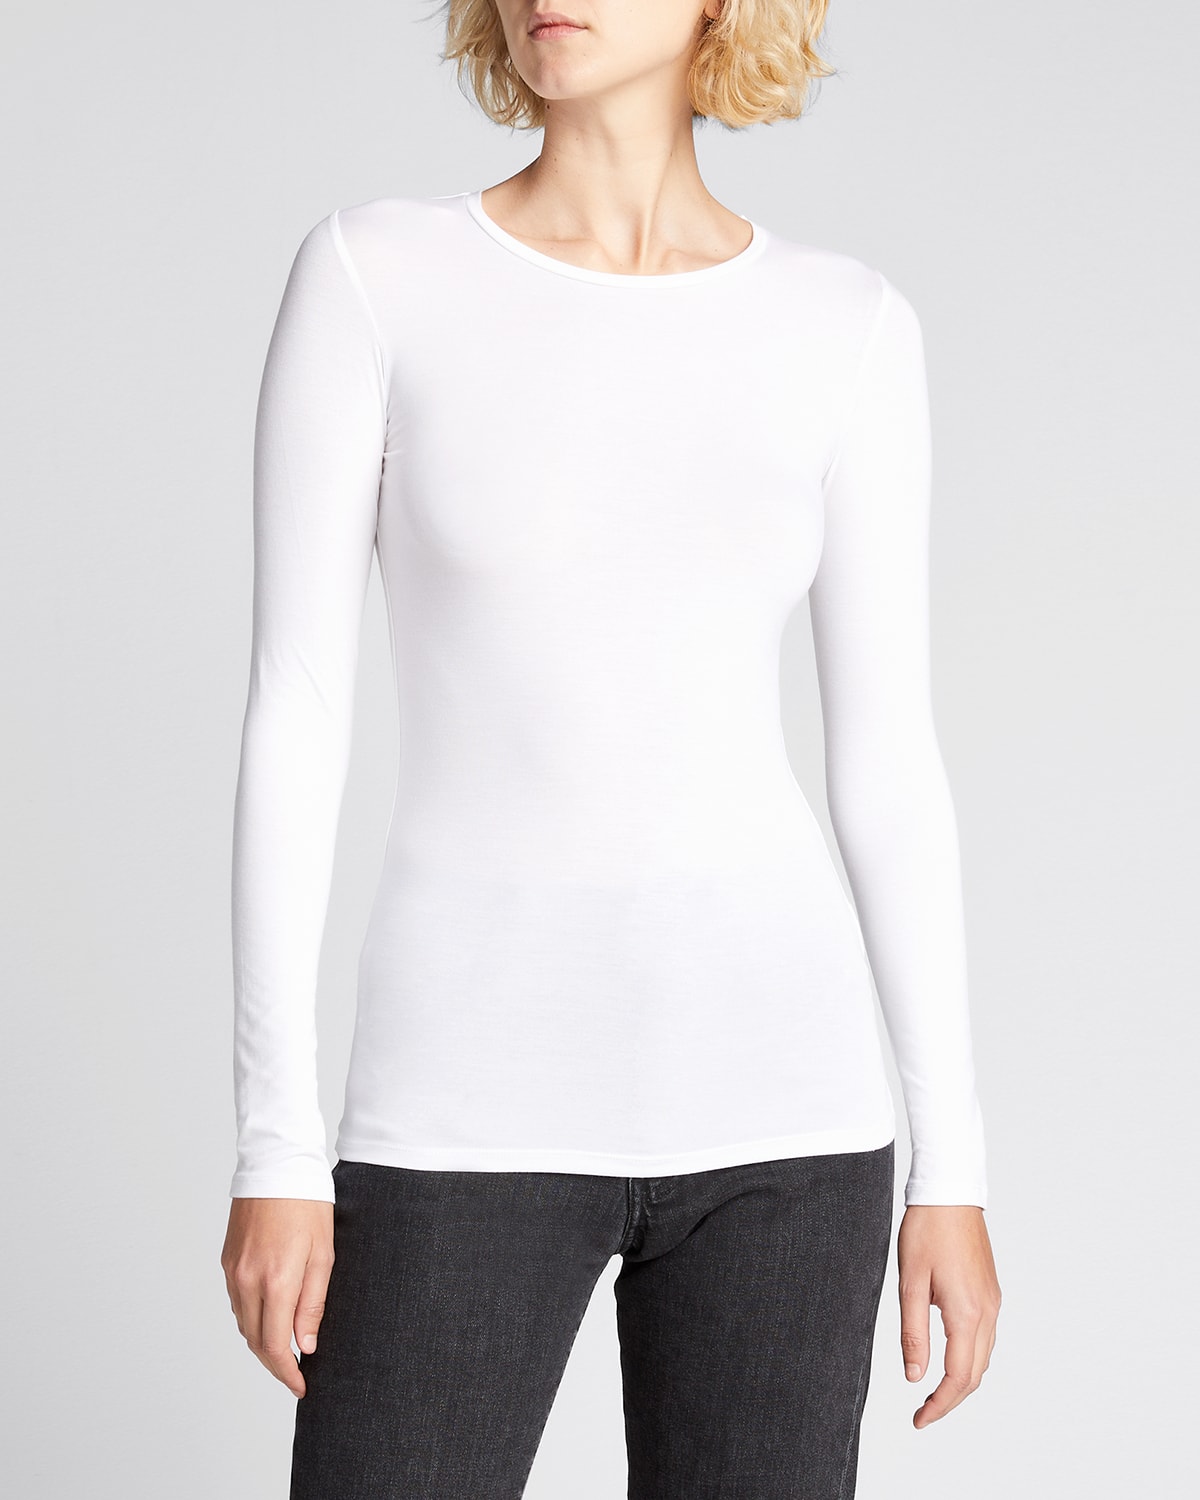 MAJESTIC SOFT TOUCH FLAT-EDGE LONG-SLEEVE CREWNECK TOP